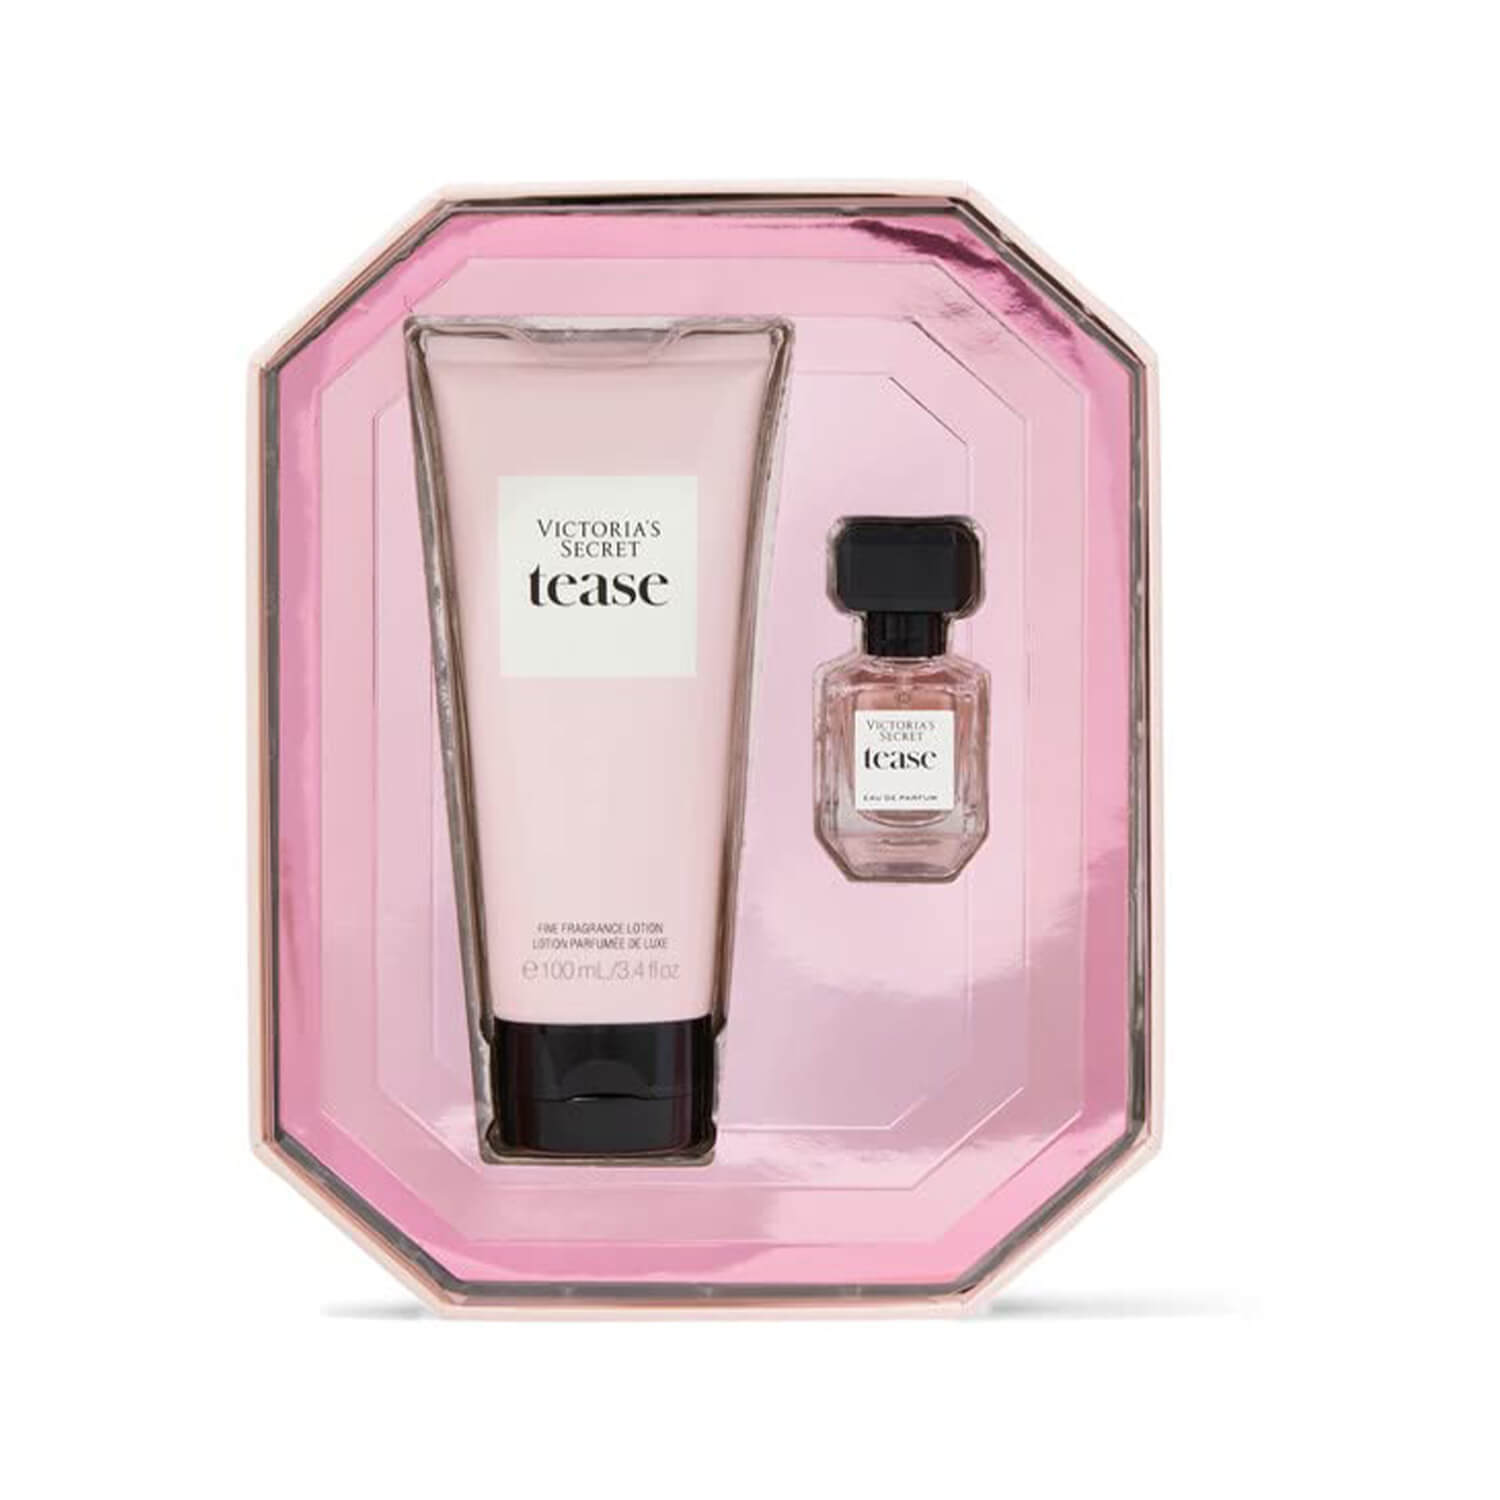 Shop 100% original Victoria's Secret Tease perfume and lotion duo gift set available at Heygirl.pk for delivery in Pakistan